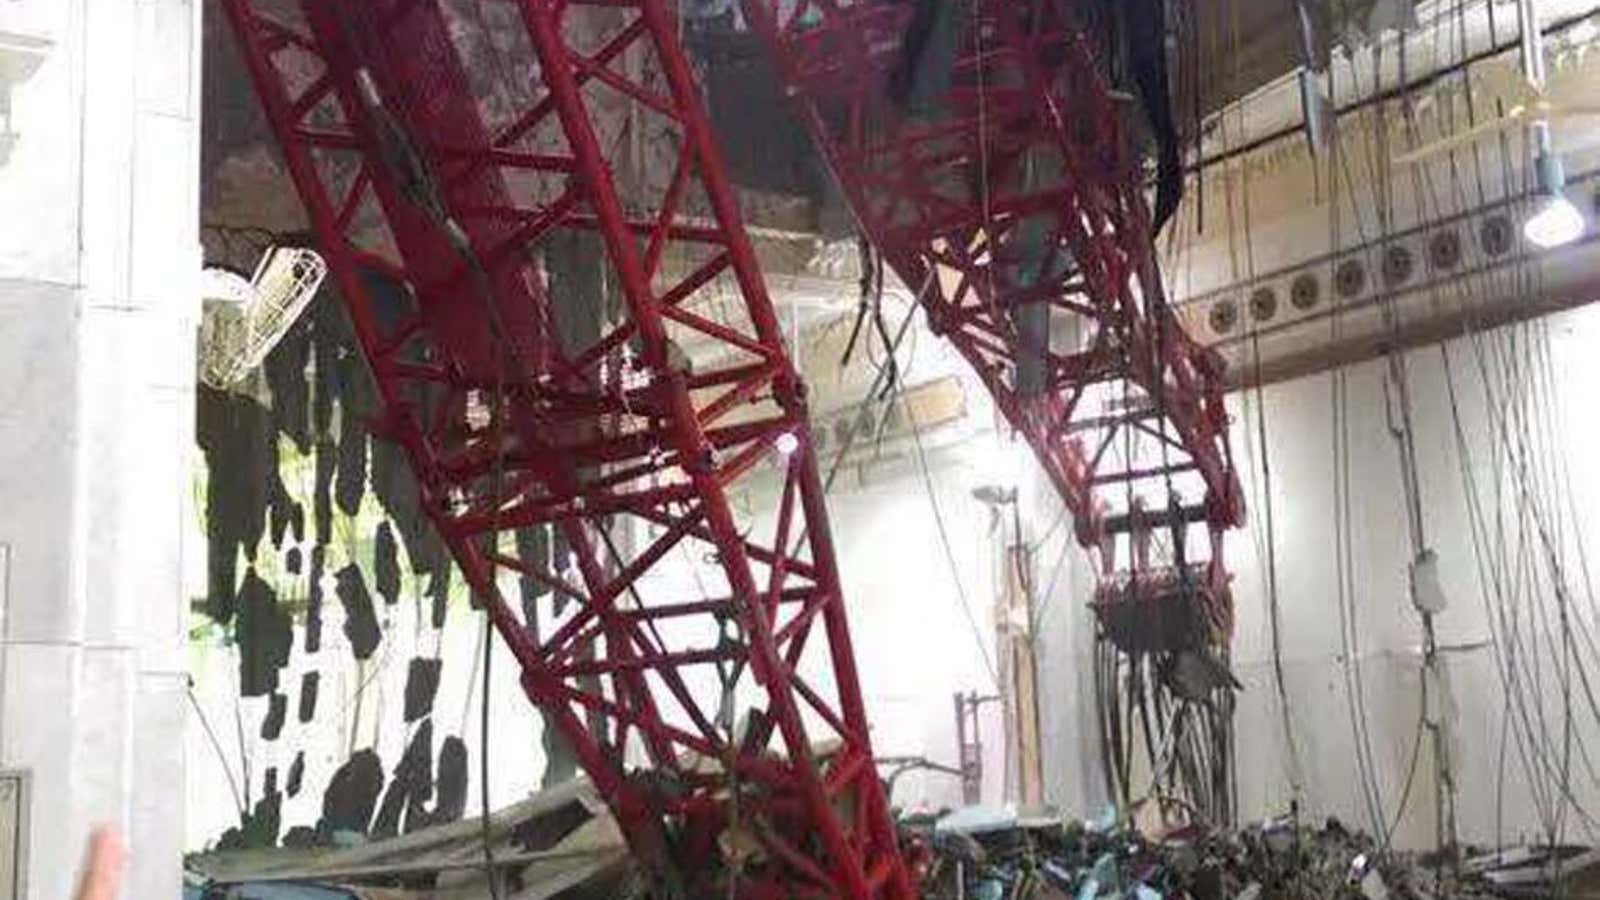 The crane that broke the mosque’s roof.